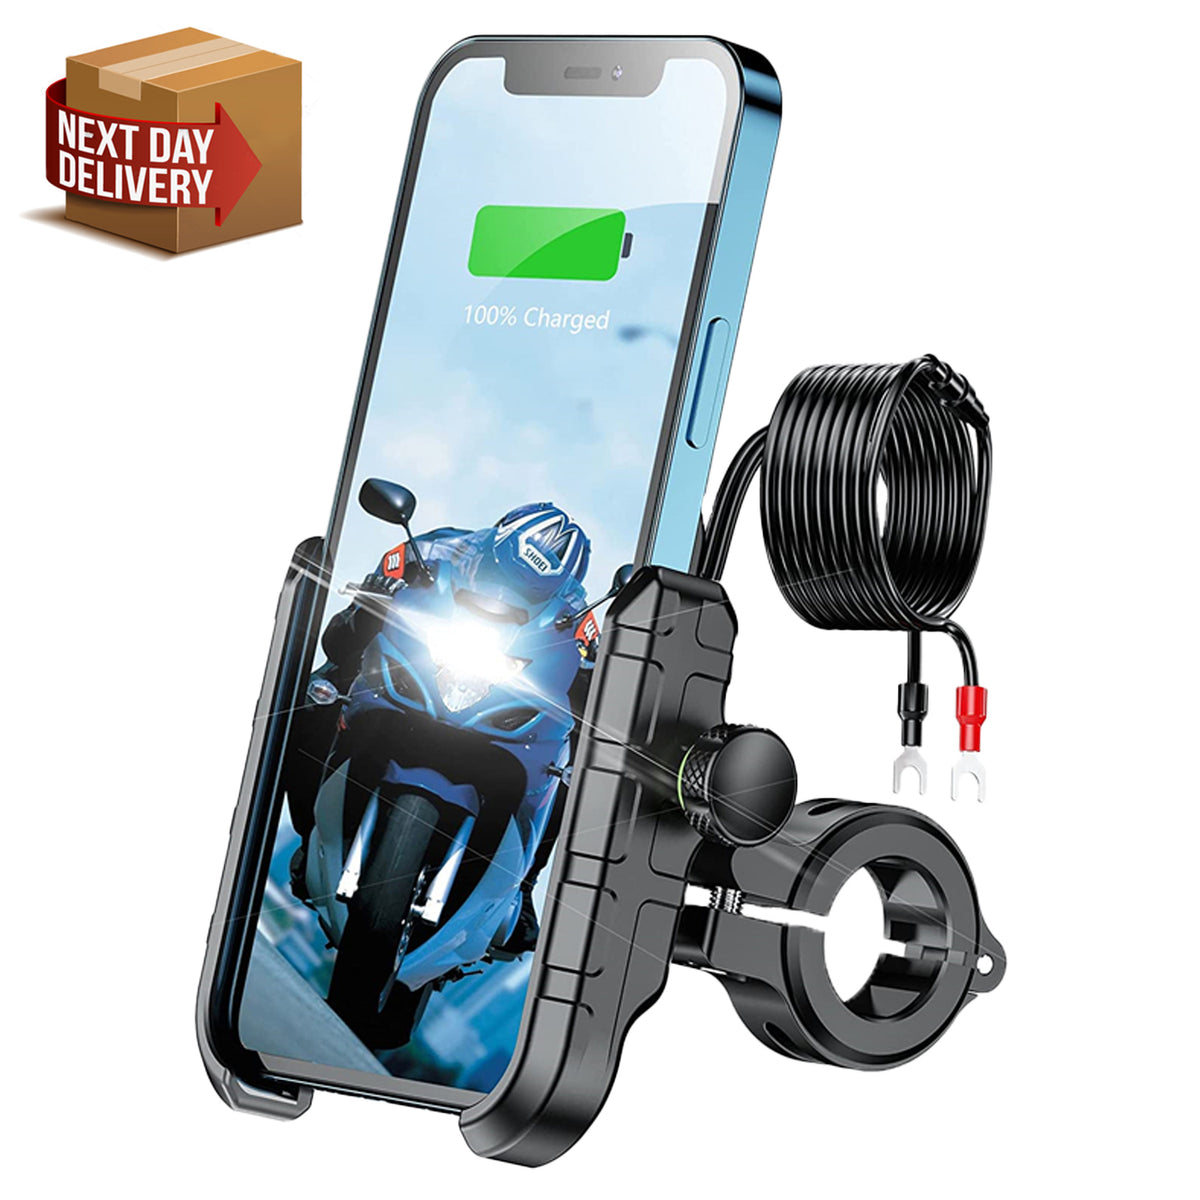 Motorcycle Phone Holder With Wireless Charger And Usb C, Ip66 Waterproof Motorcycle  Phone Holder For 4 - 7 Phones, One Hand Operation - Snngv